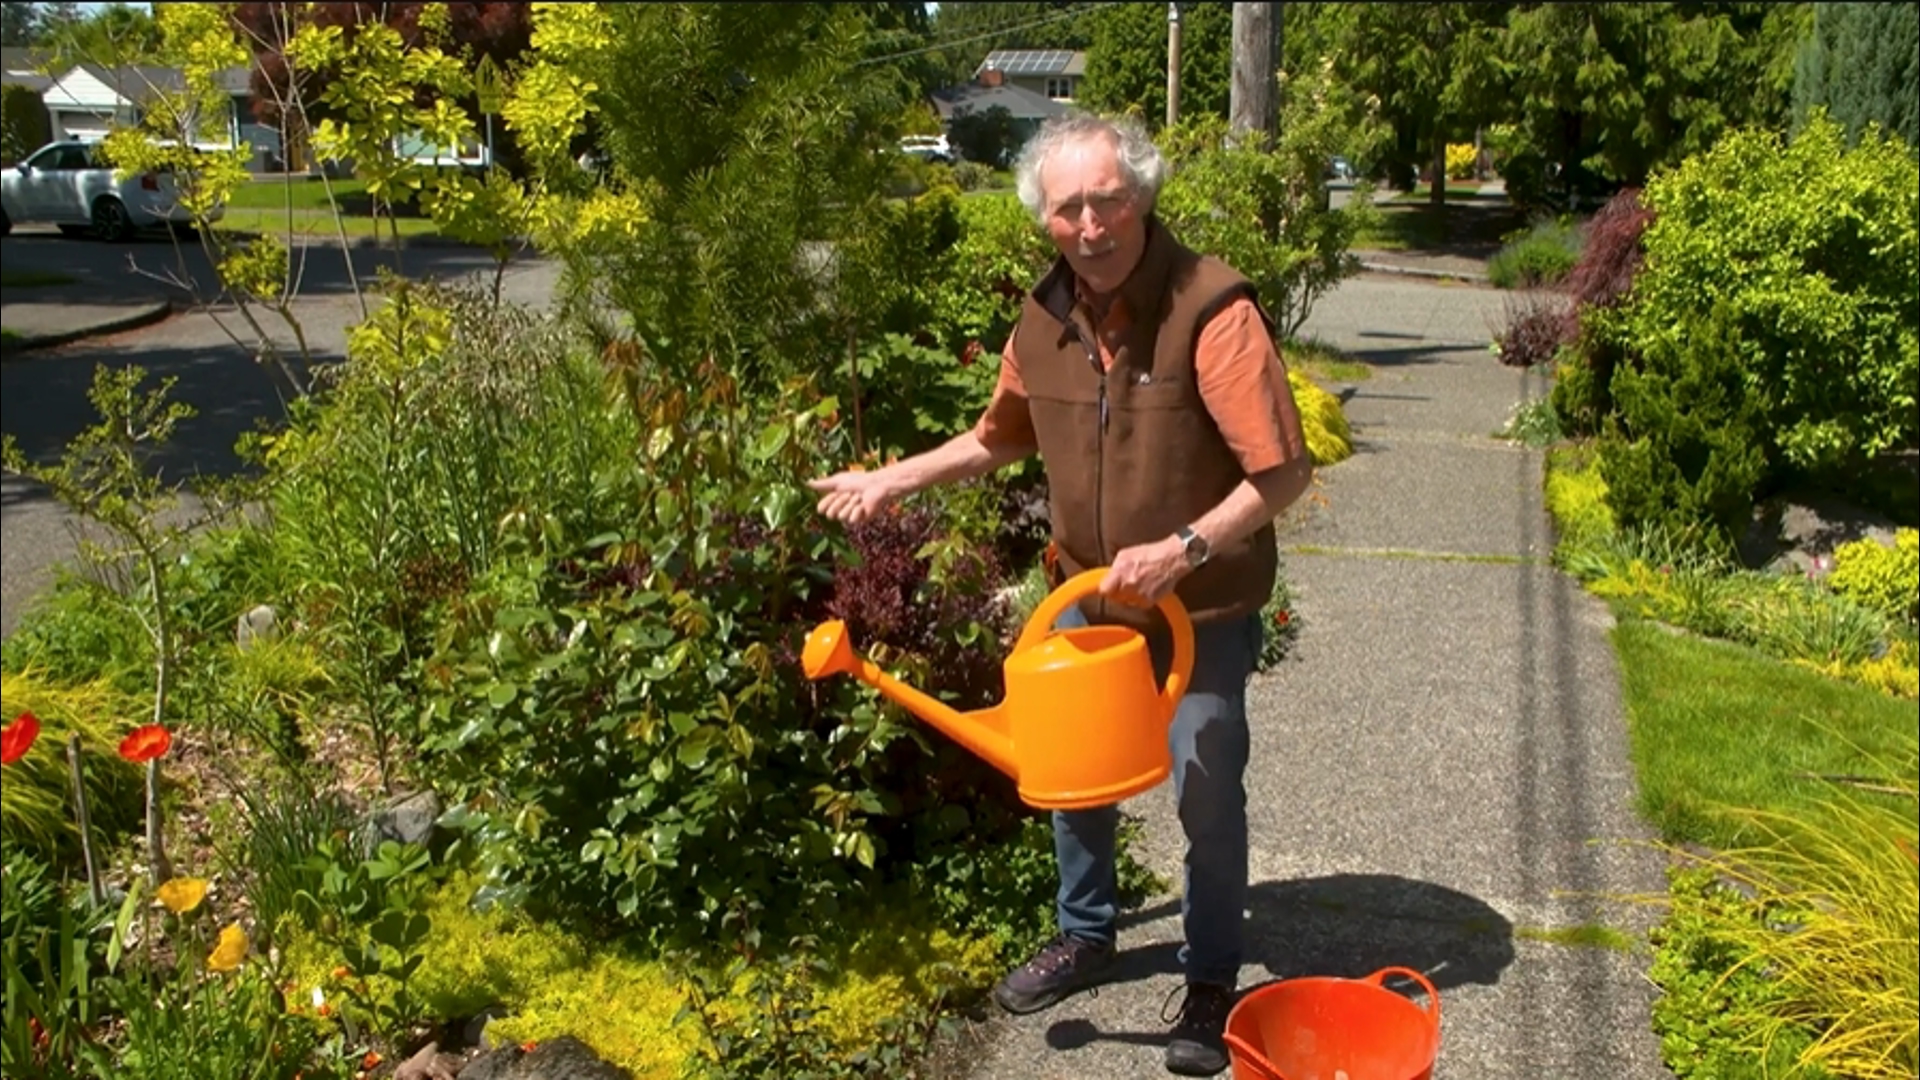 Seattle gardening expert Ciscoe Morris has your mid-summer to-do list. Sponsored by Dramm.